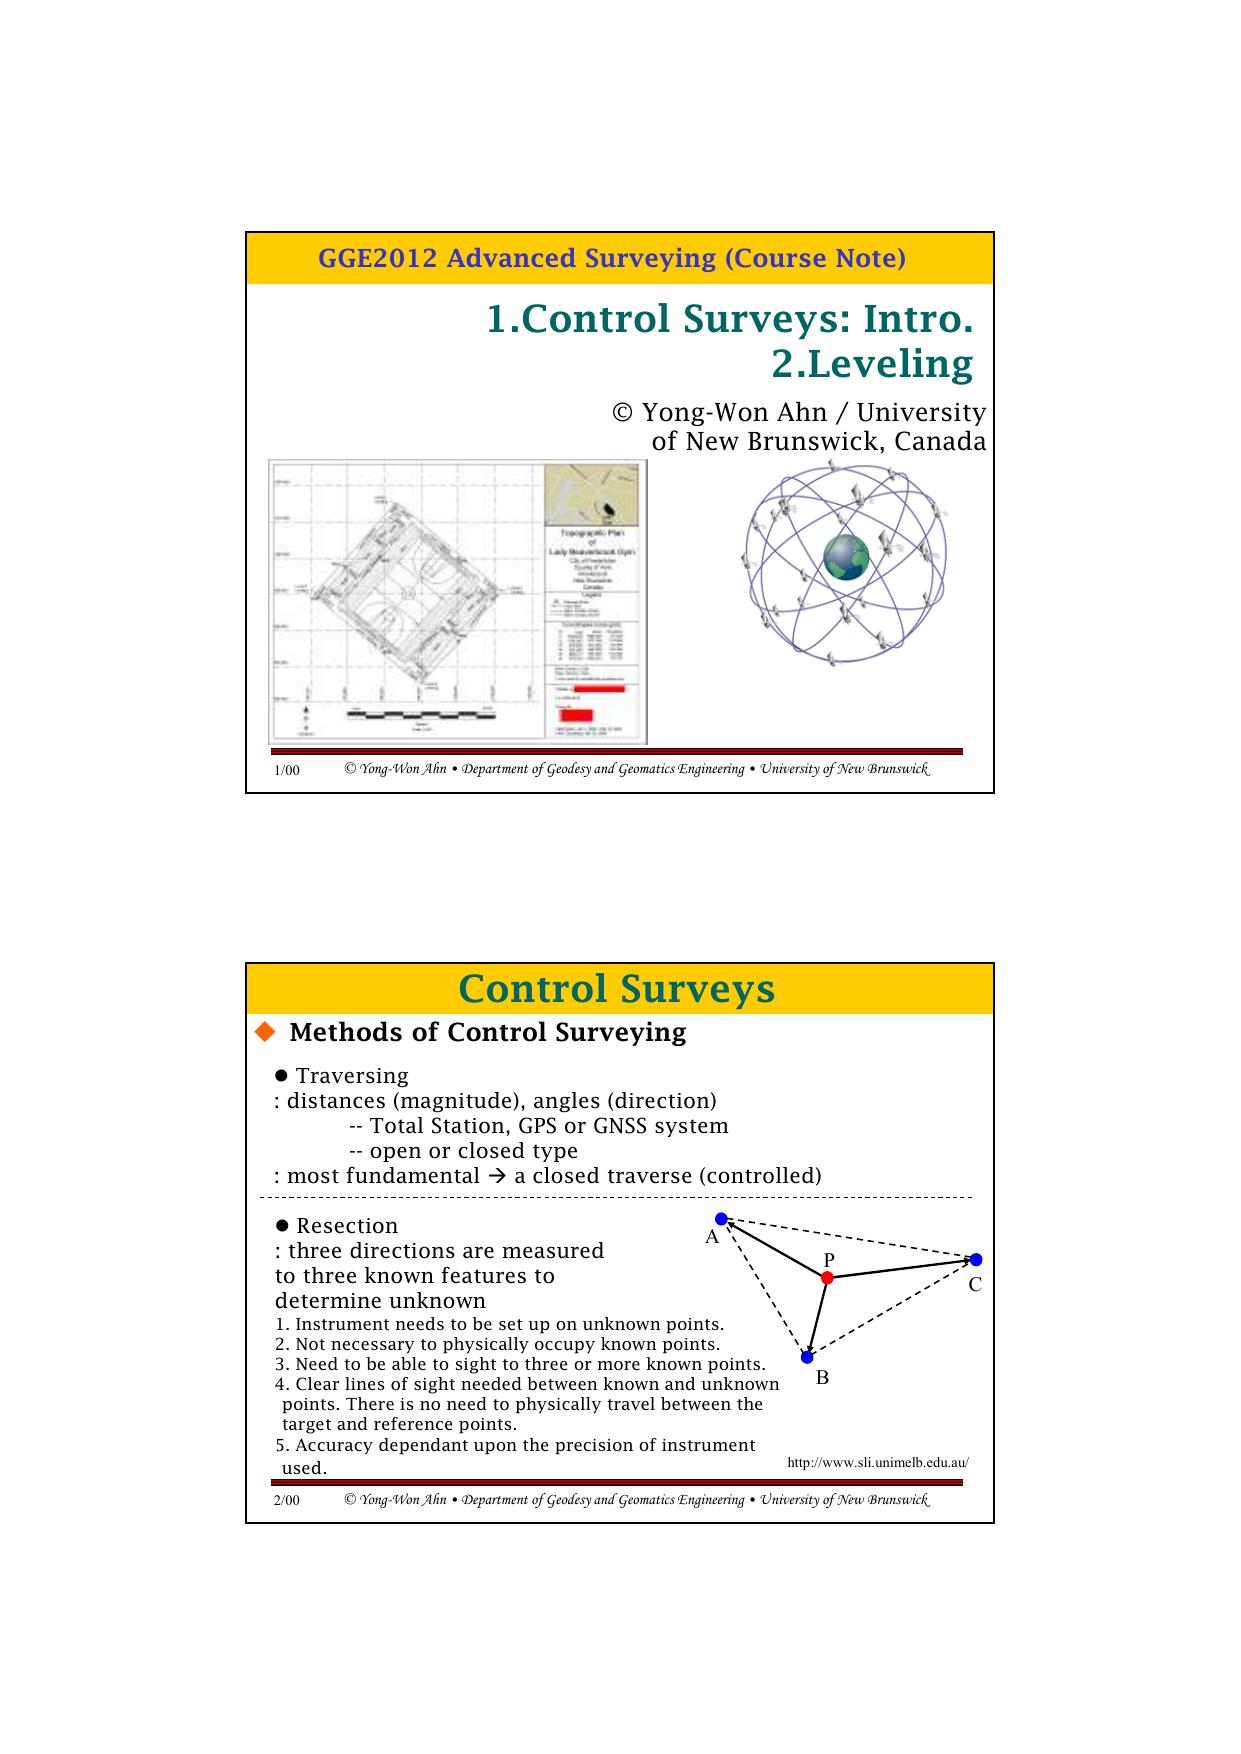 Microsoft PowerPoint - 04.Lecture110118_GGE2012_ControlSurveys_Leveling_byAhn